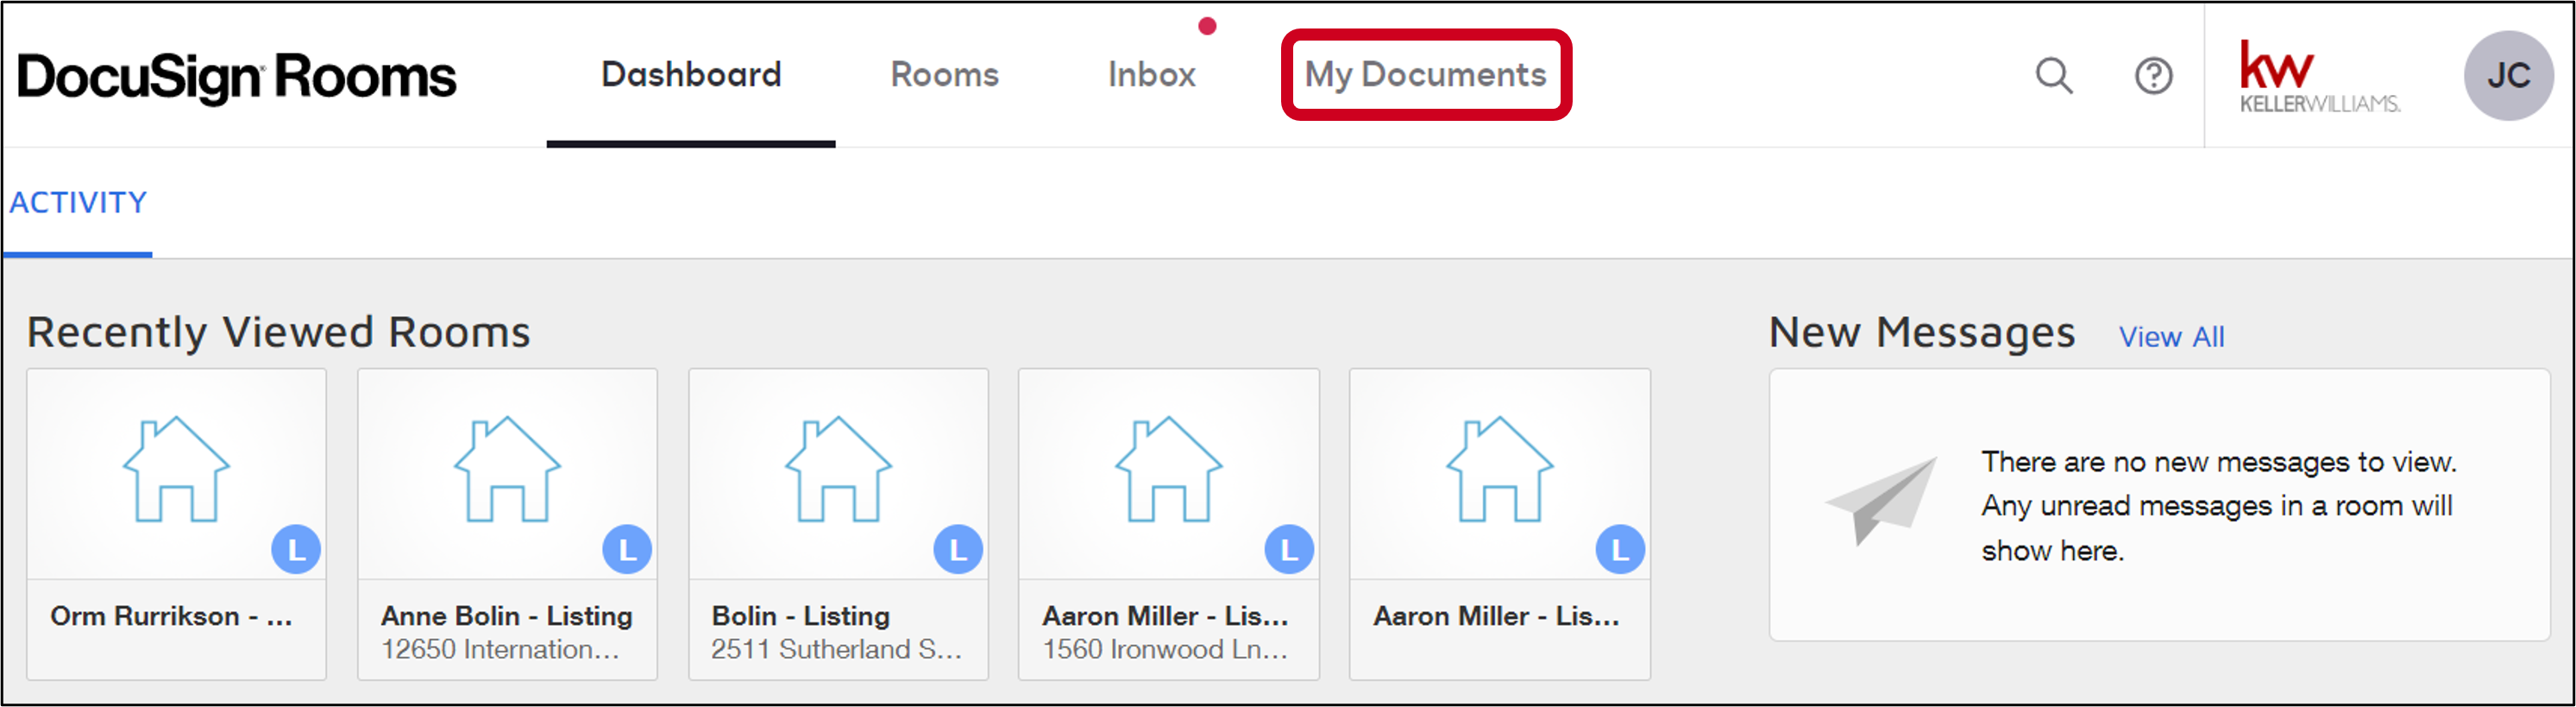 docusign_my_documents_tab.png